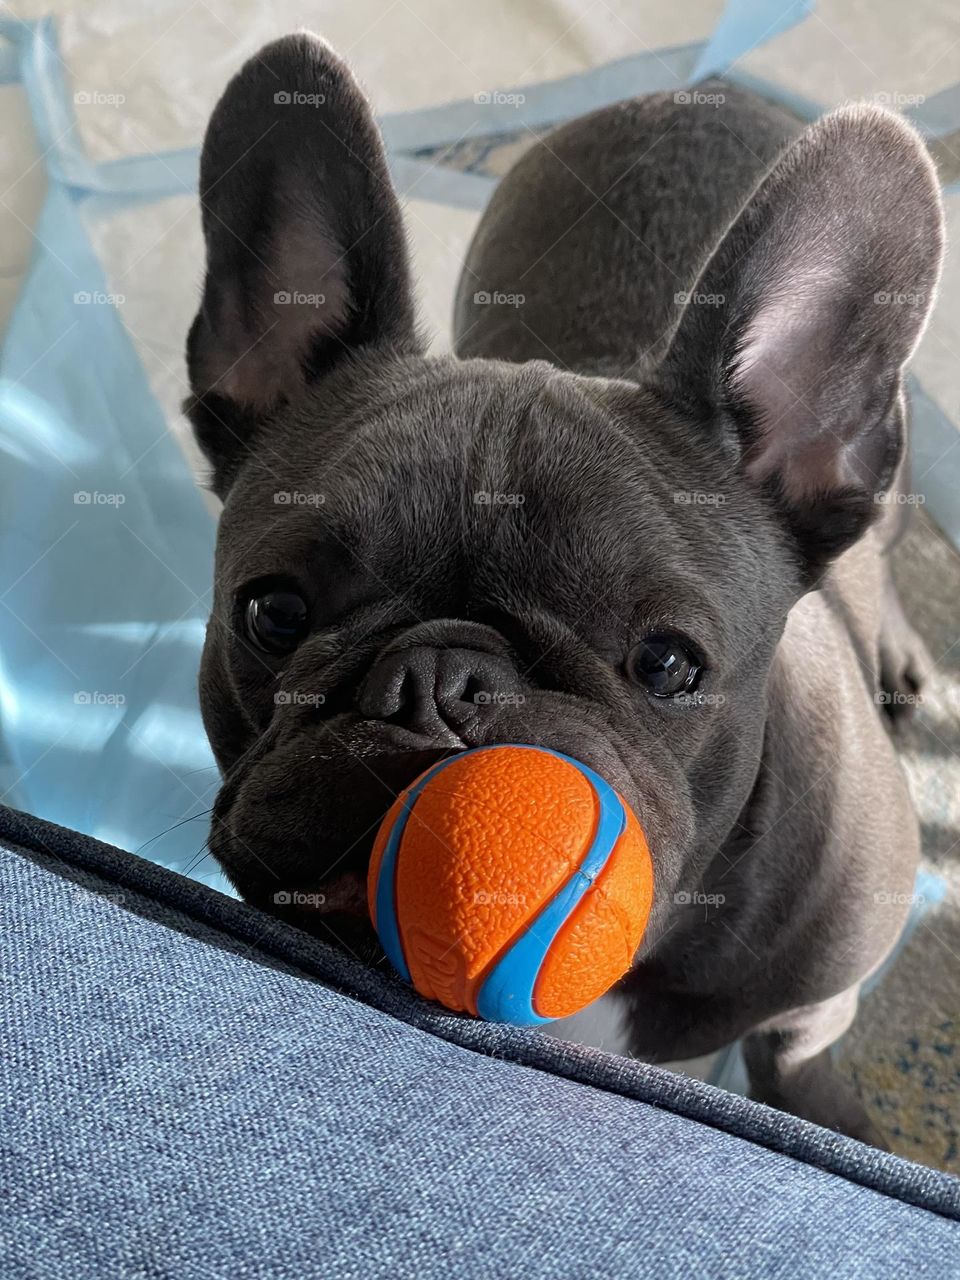 Our baby with her most favorite ball